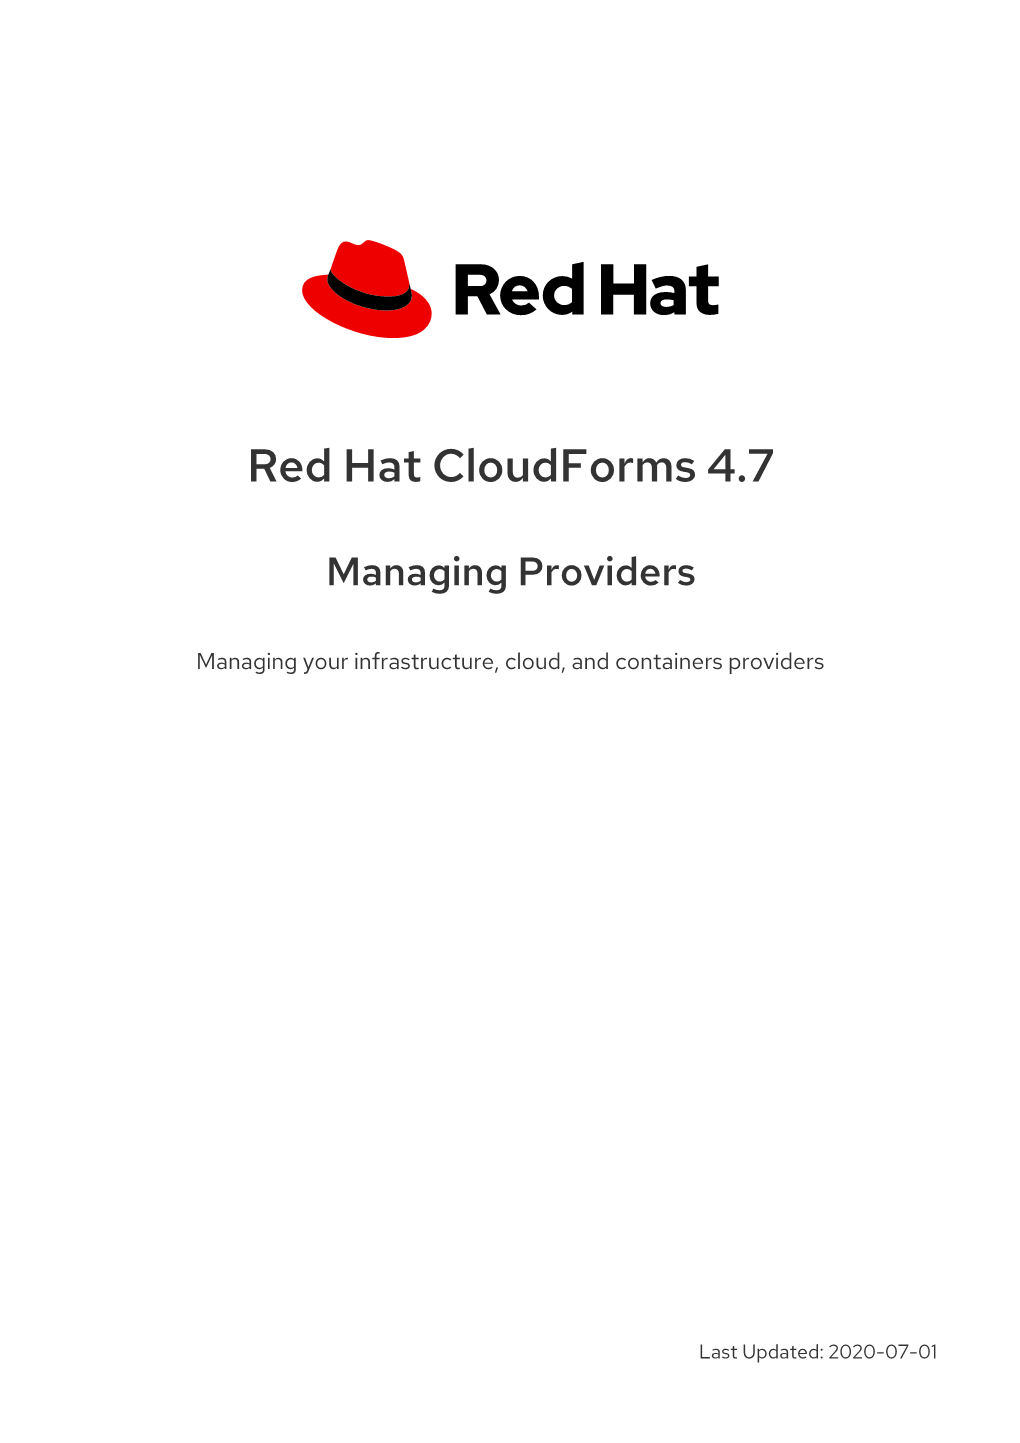 Red Hat Cloudforms 4.7 Managing Providers